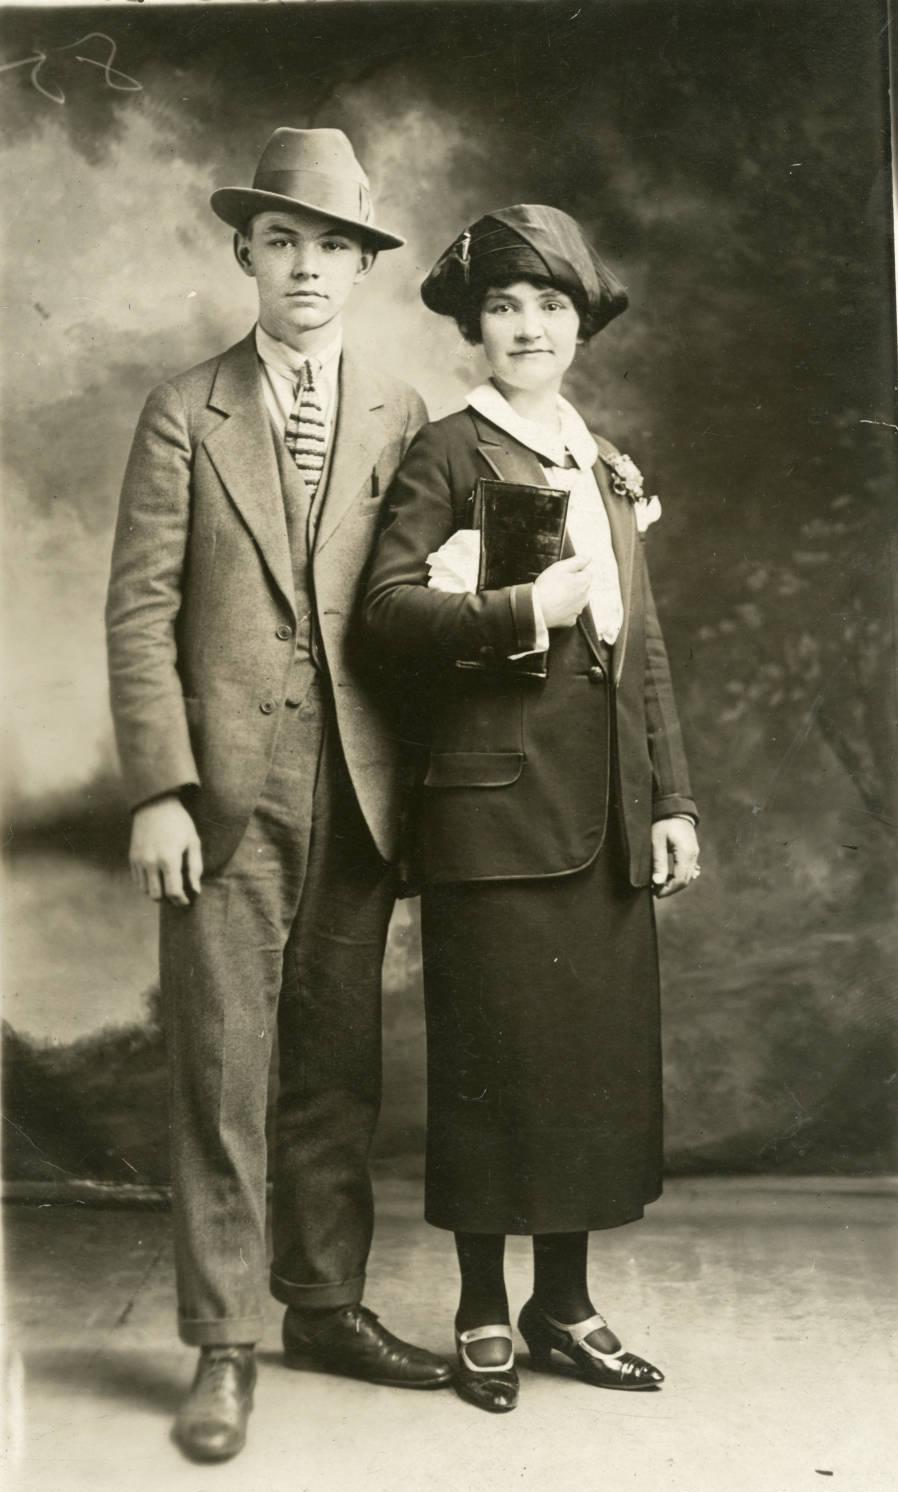 A young man stands next to his mother in a photoshoot image.